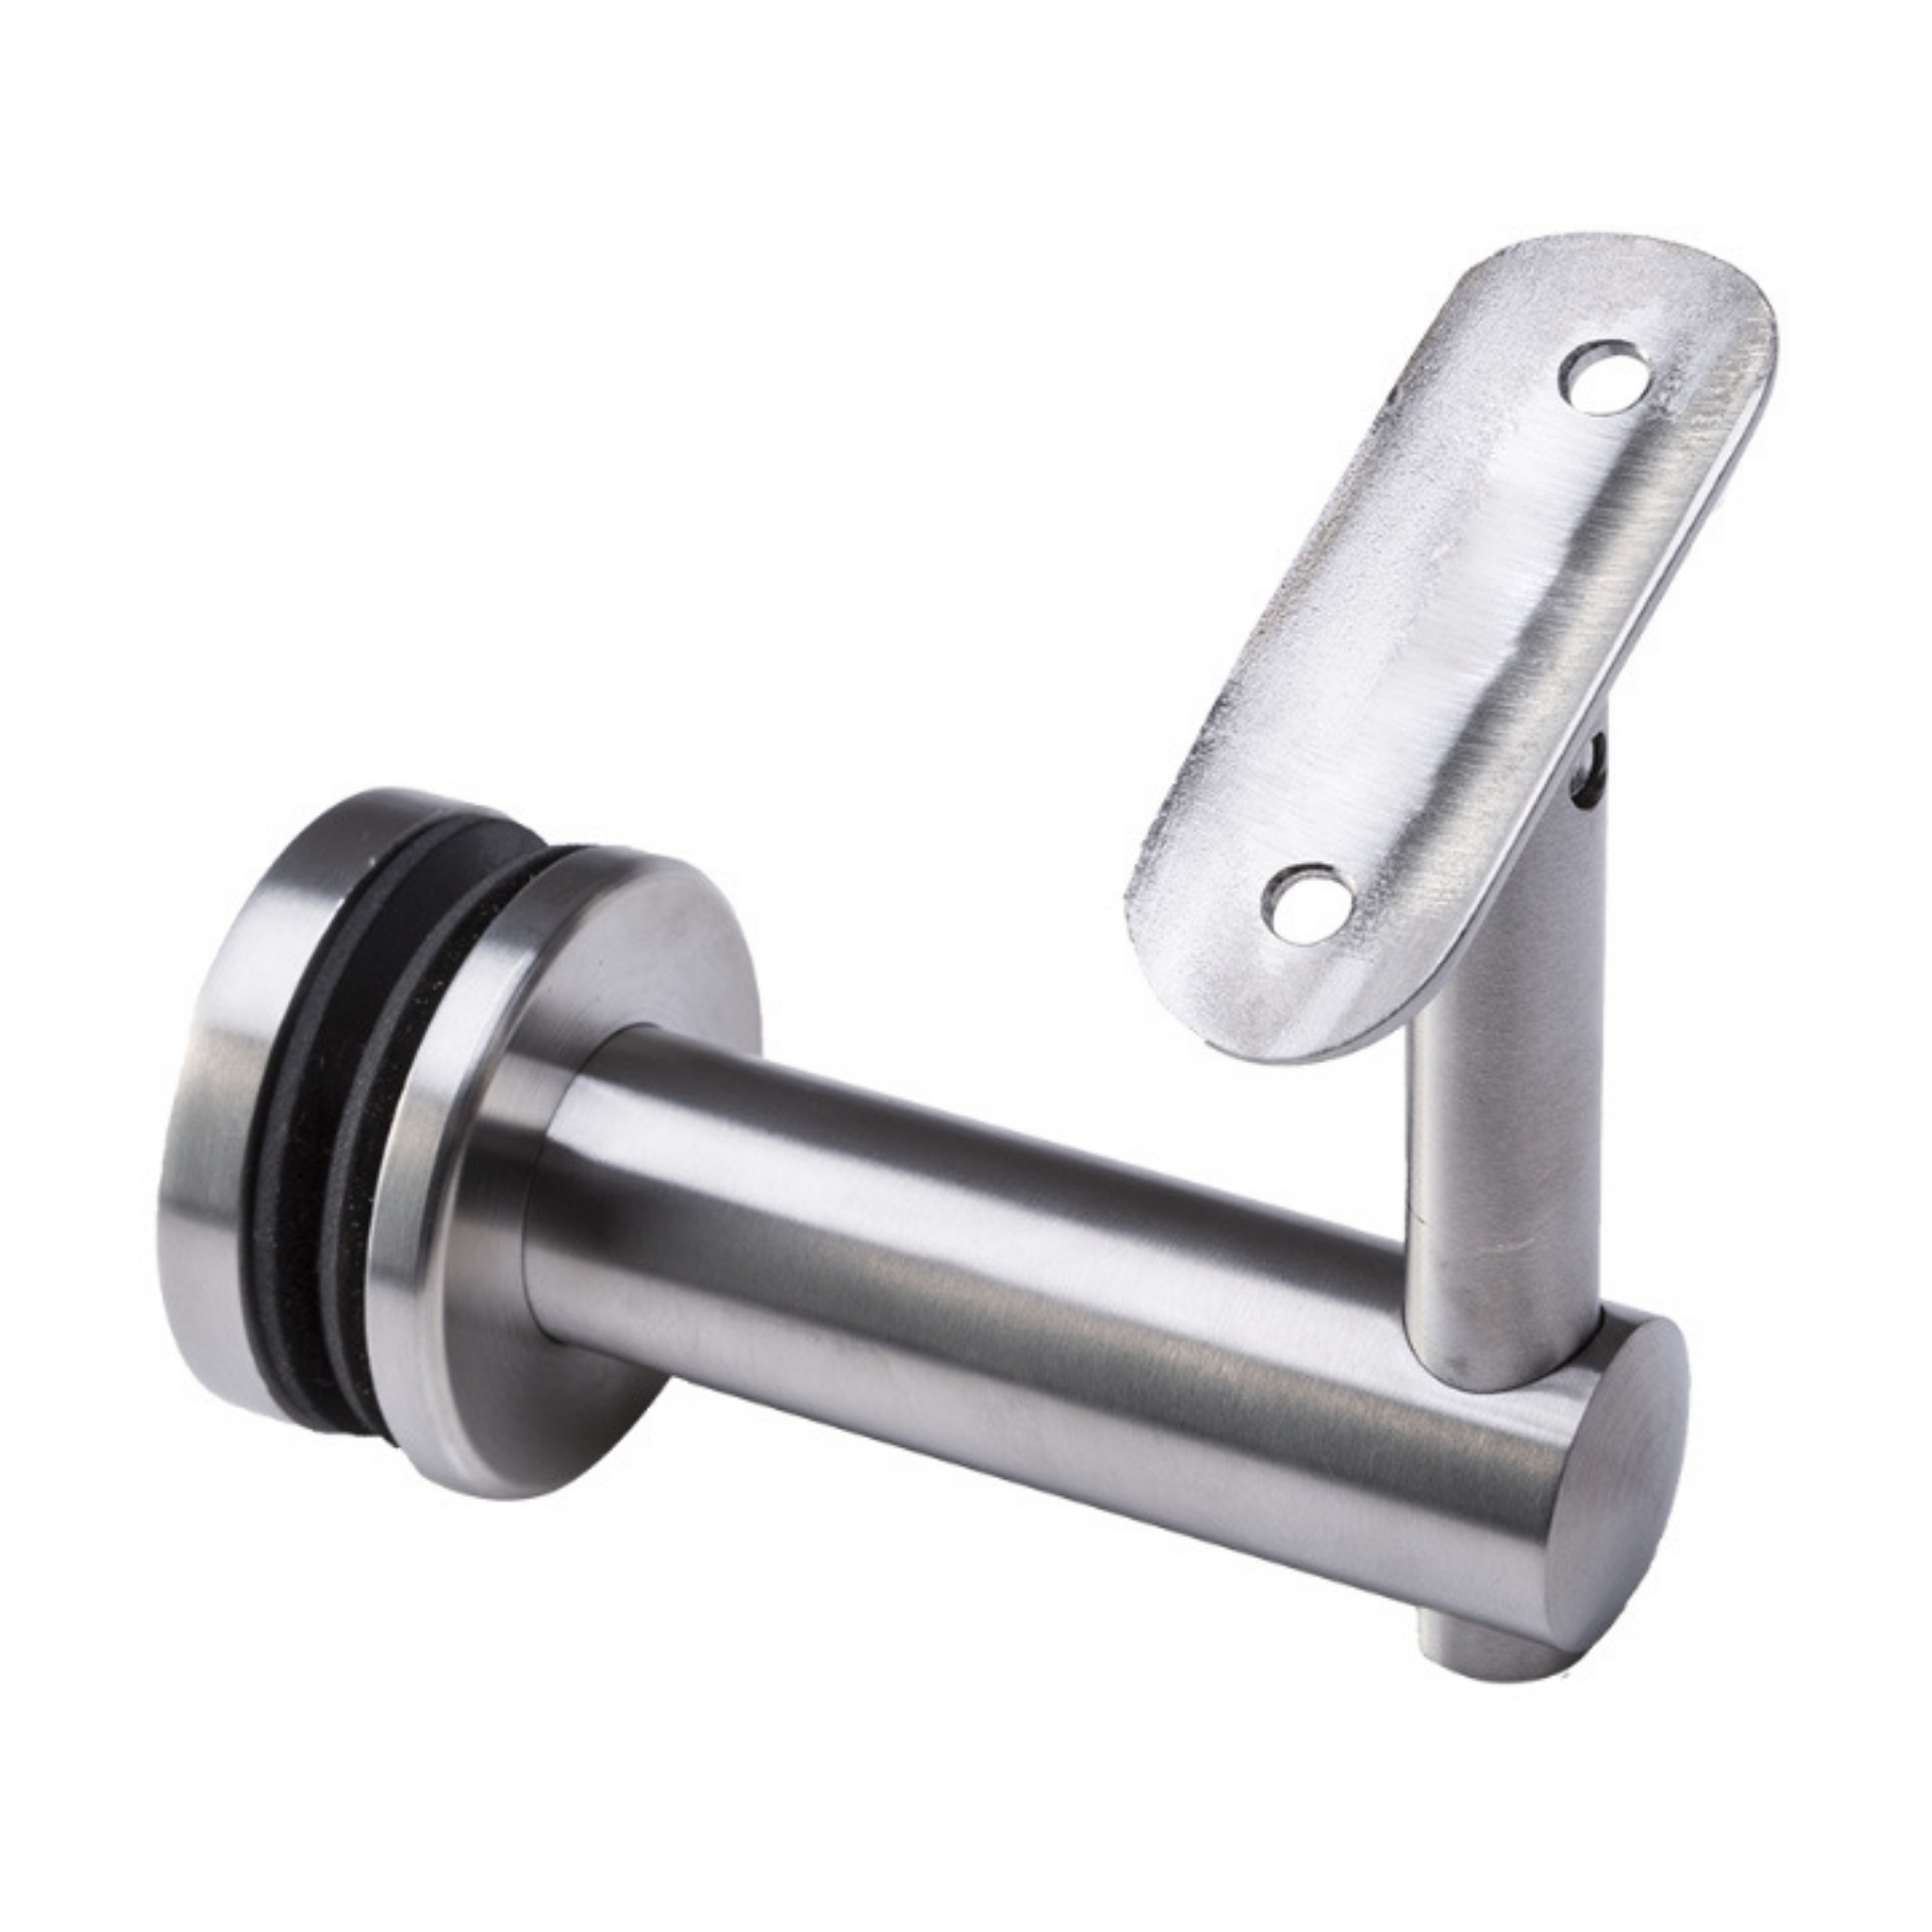 Glass-mounted handrail supporter- adjustable - 42.4 - StroFIX